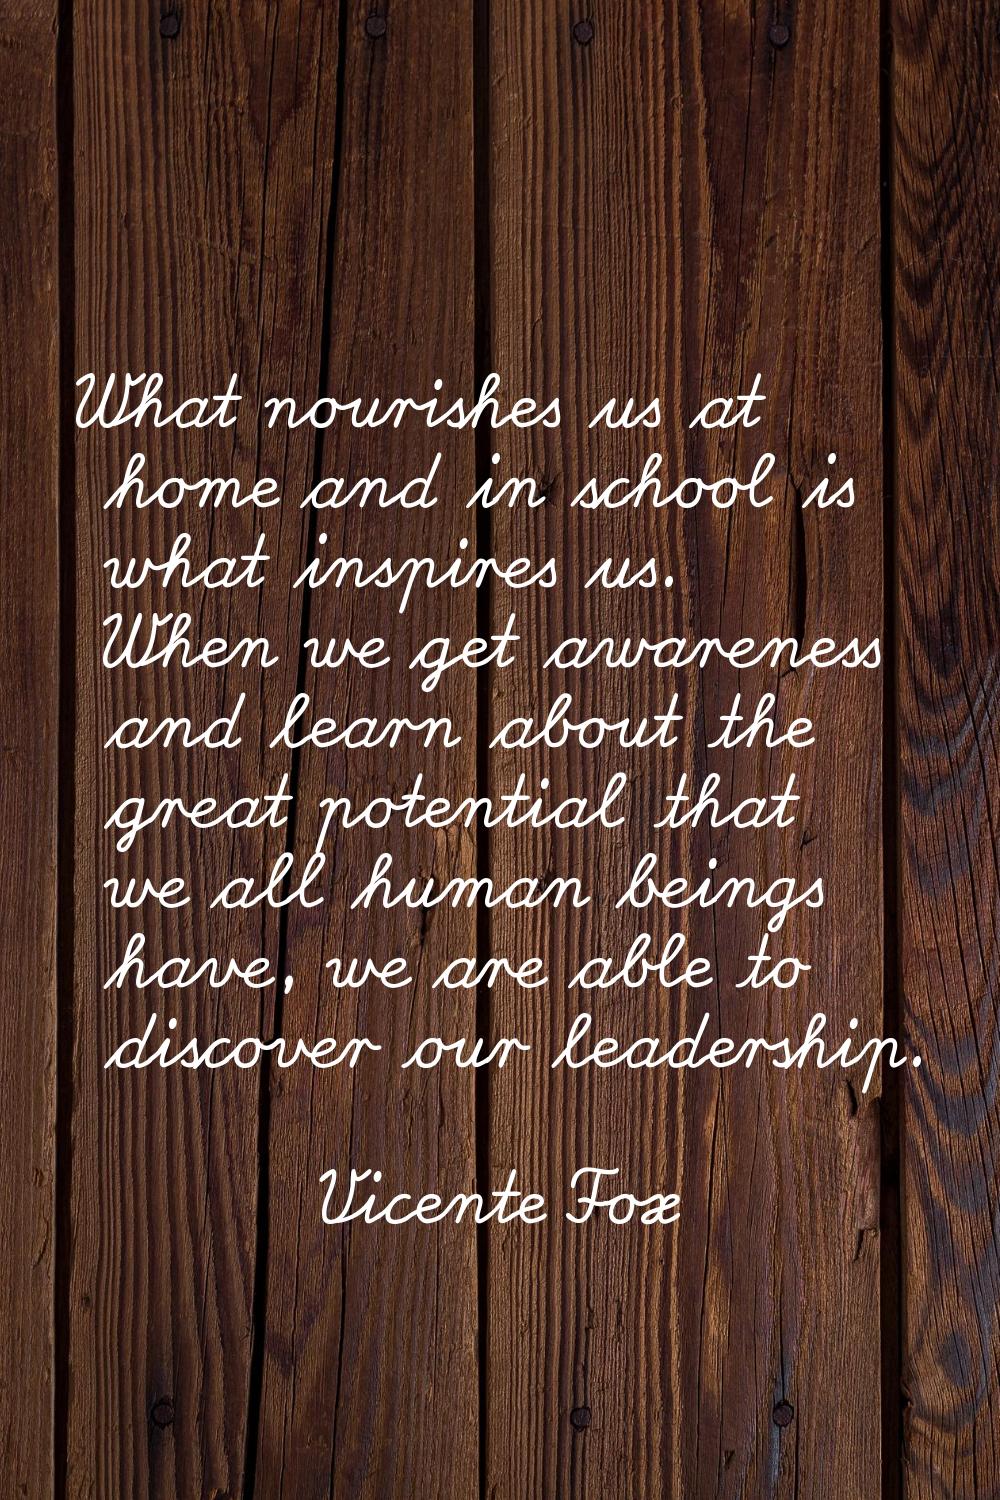 What nourishes us at home and in school is what inspires us. When we get awareness and learn about 